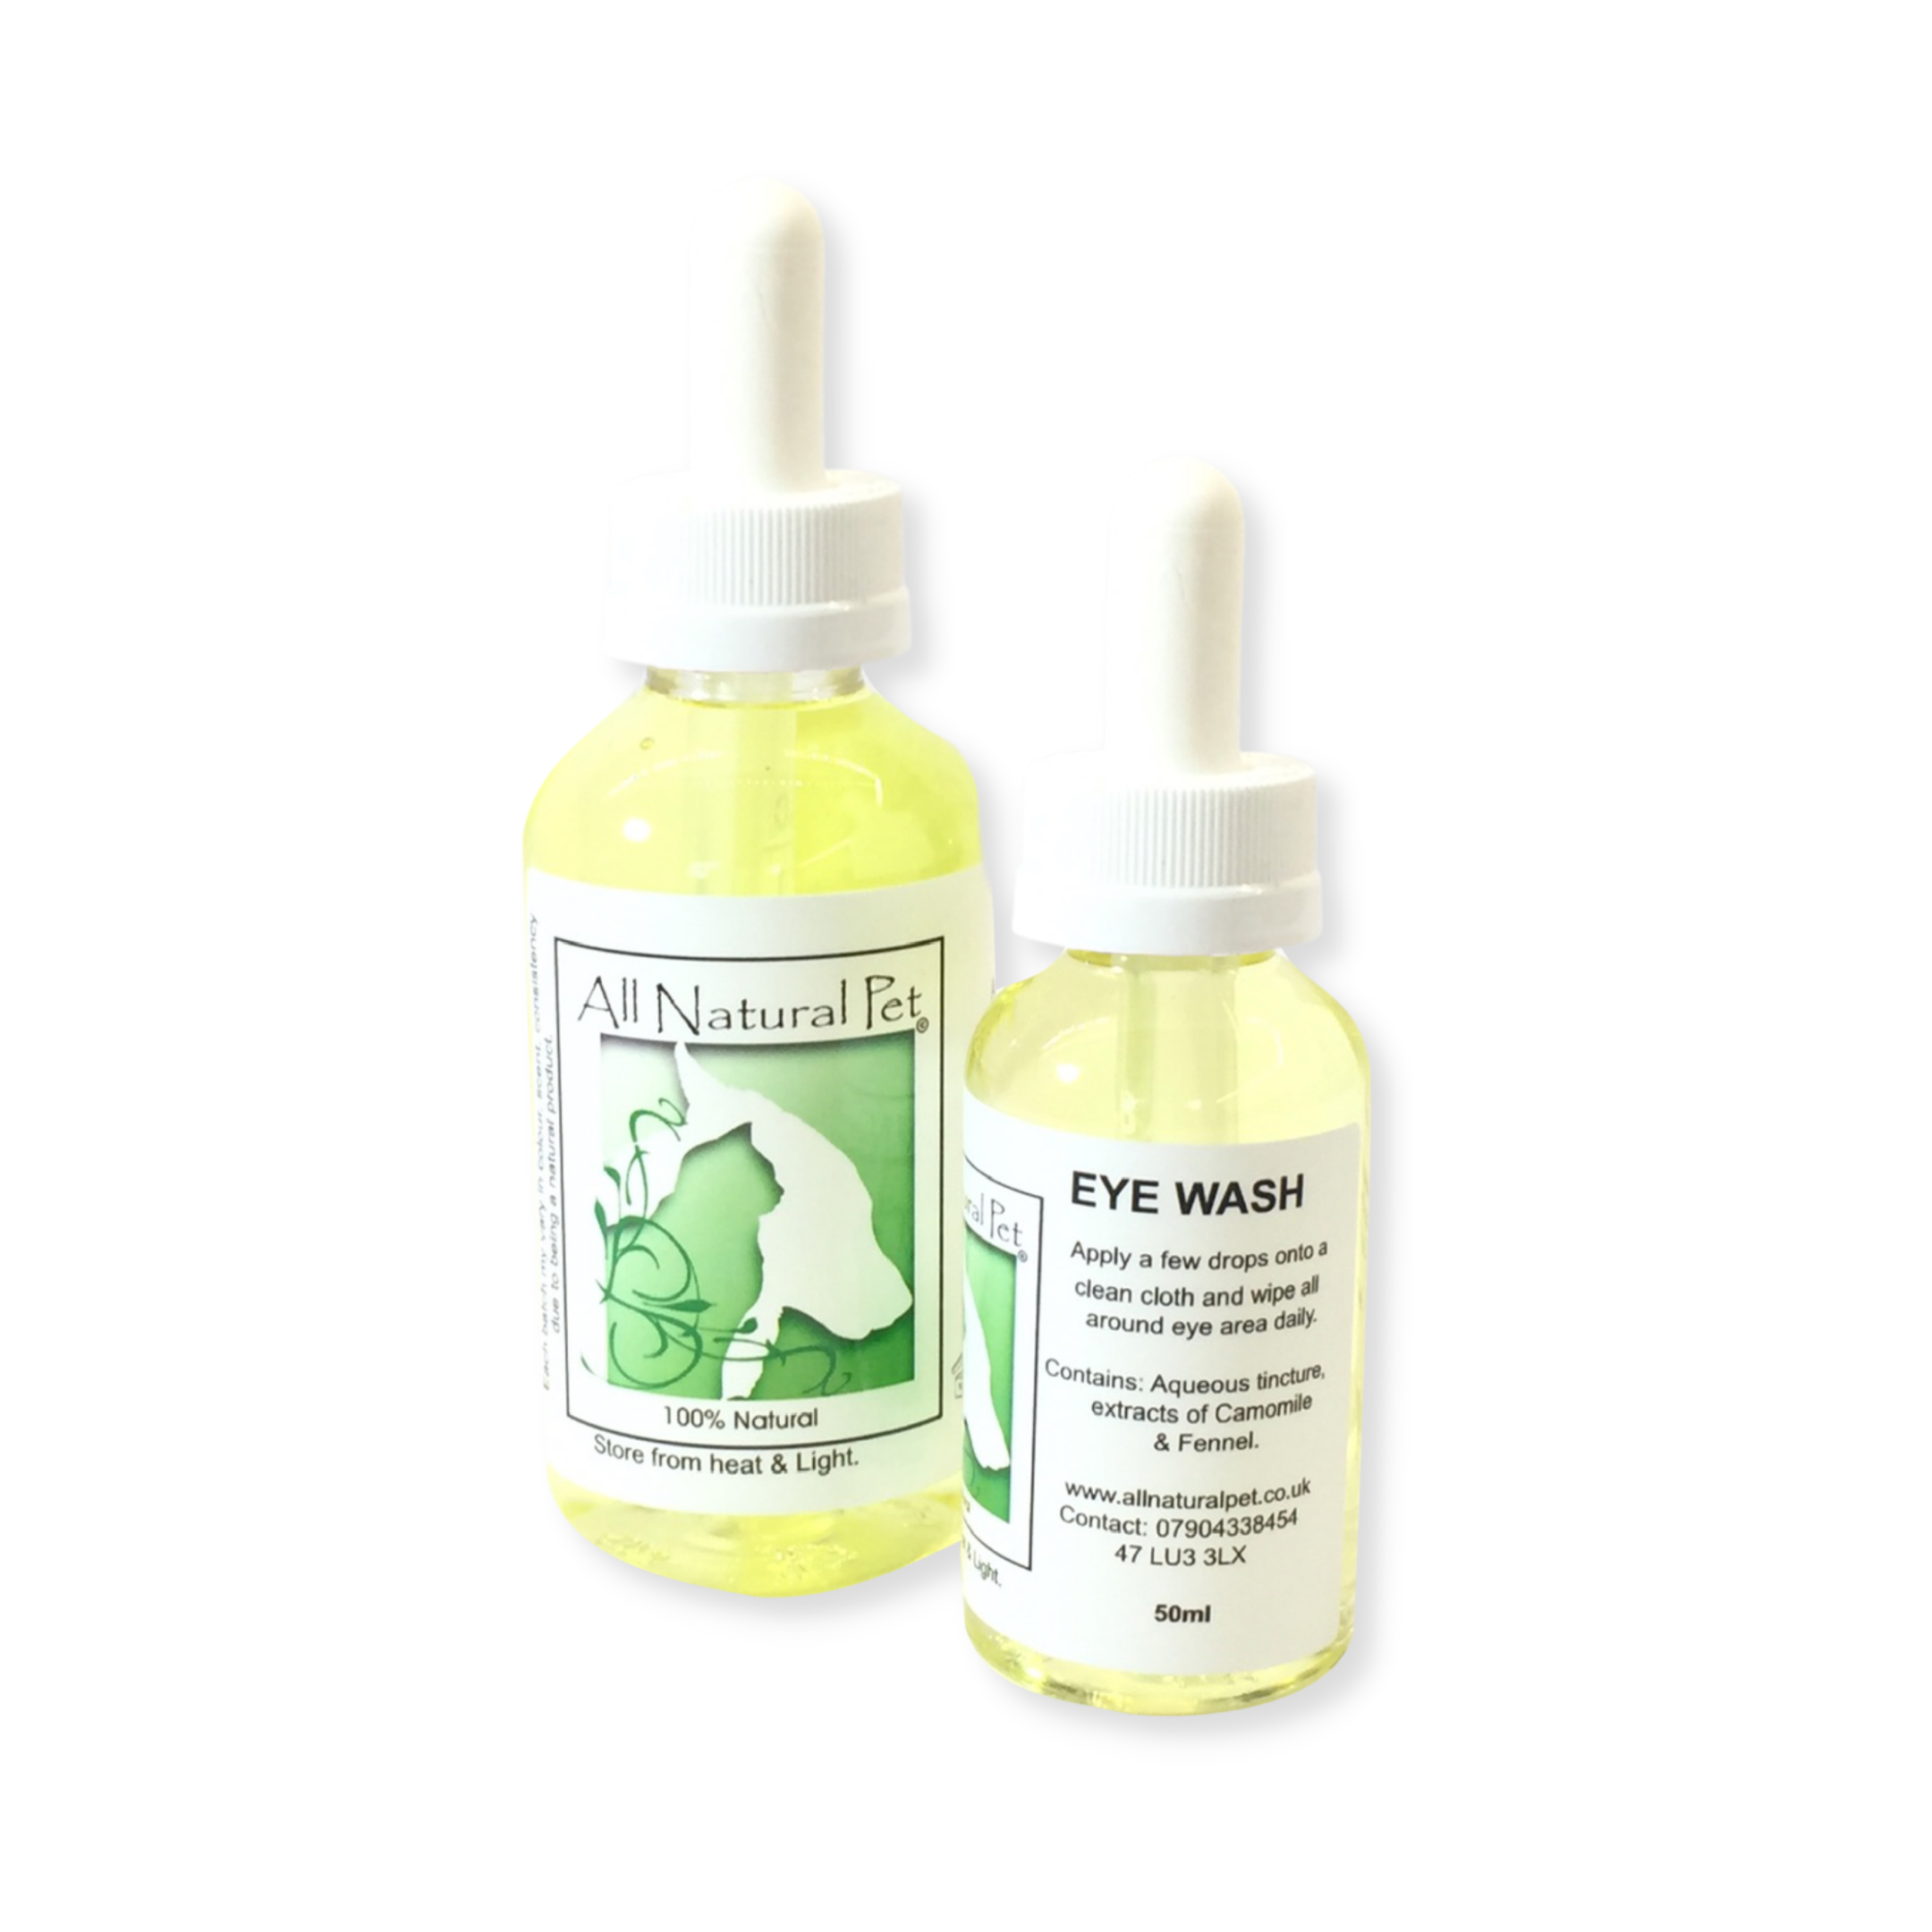 A couple of pipette topped bottles containing a pale yellow solution of herbal ingredients for cleaning pets eyes